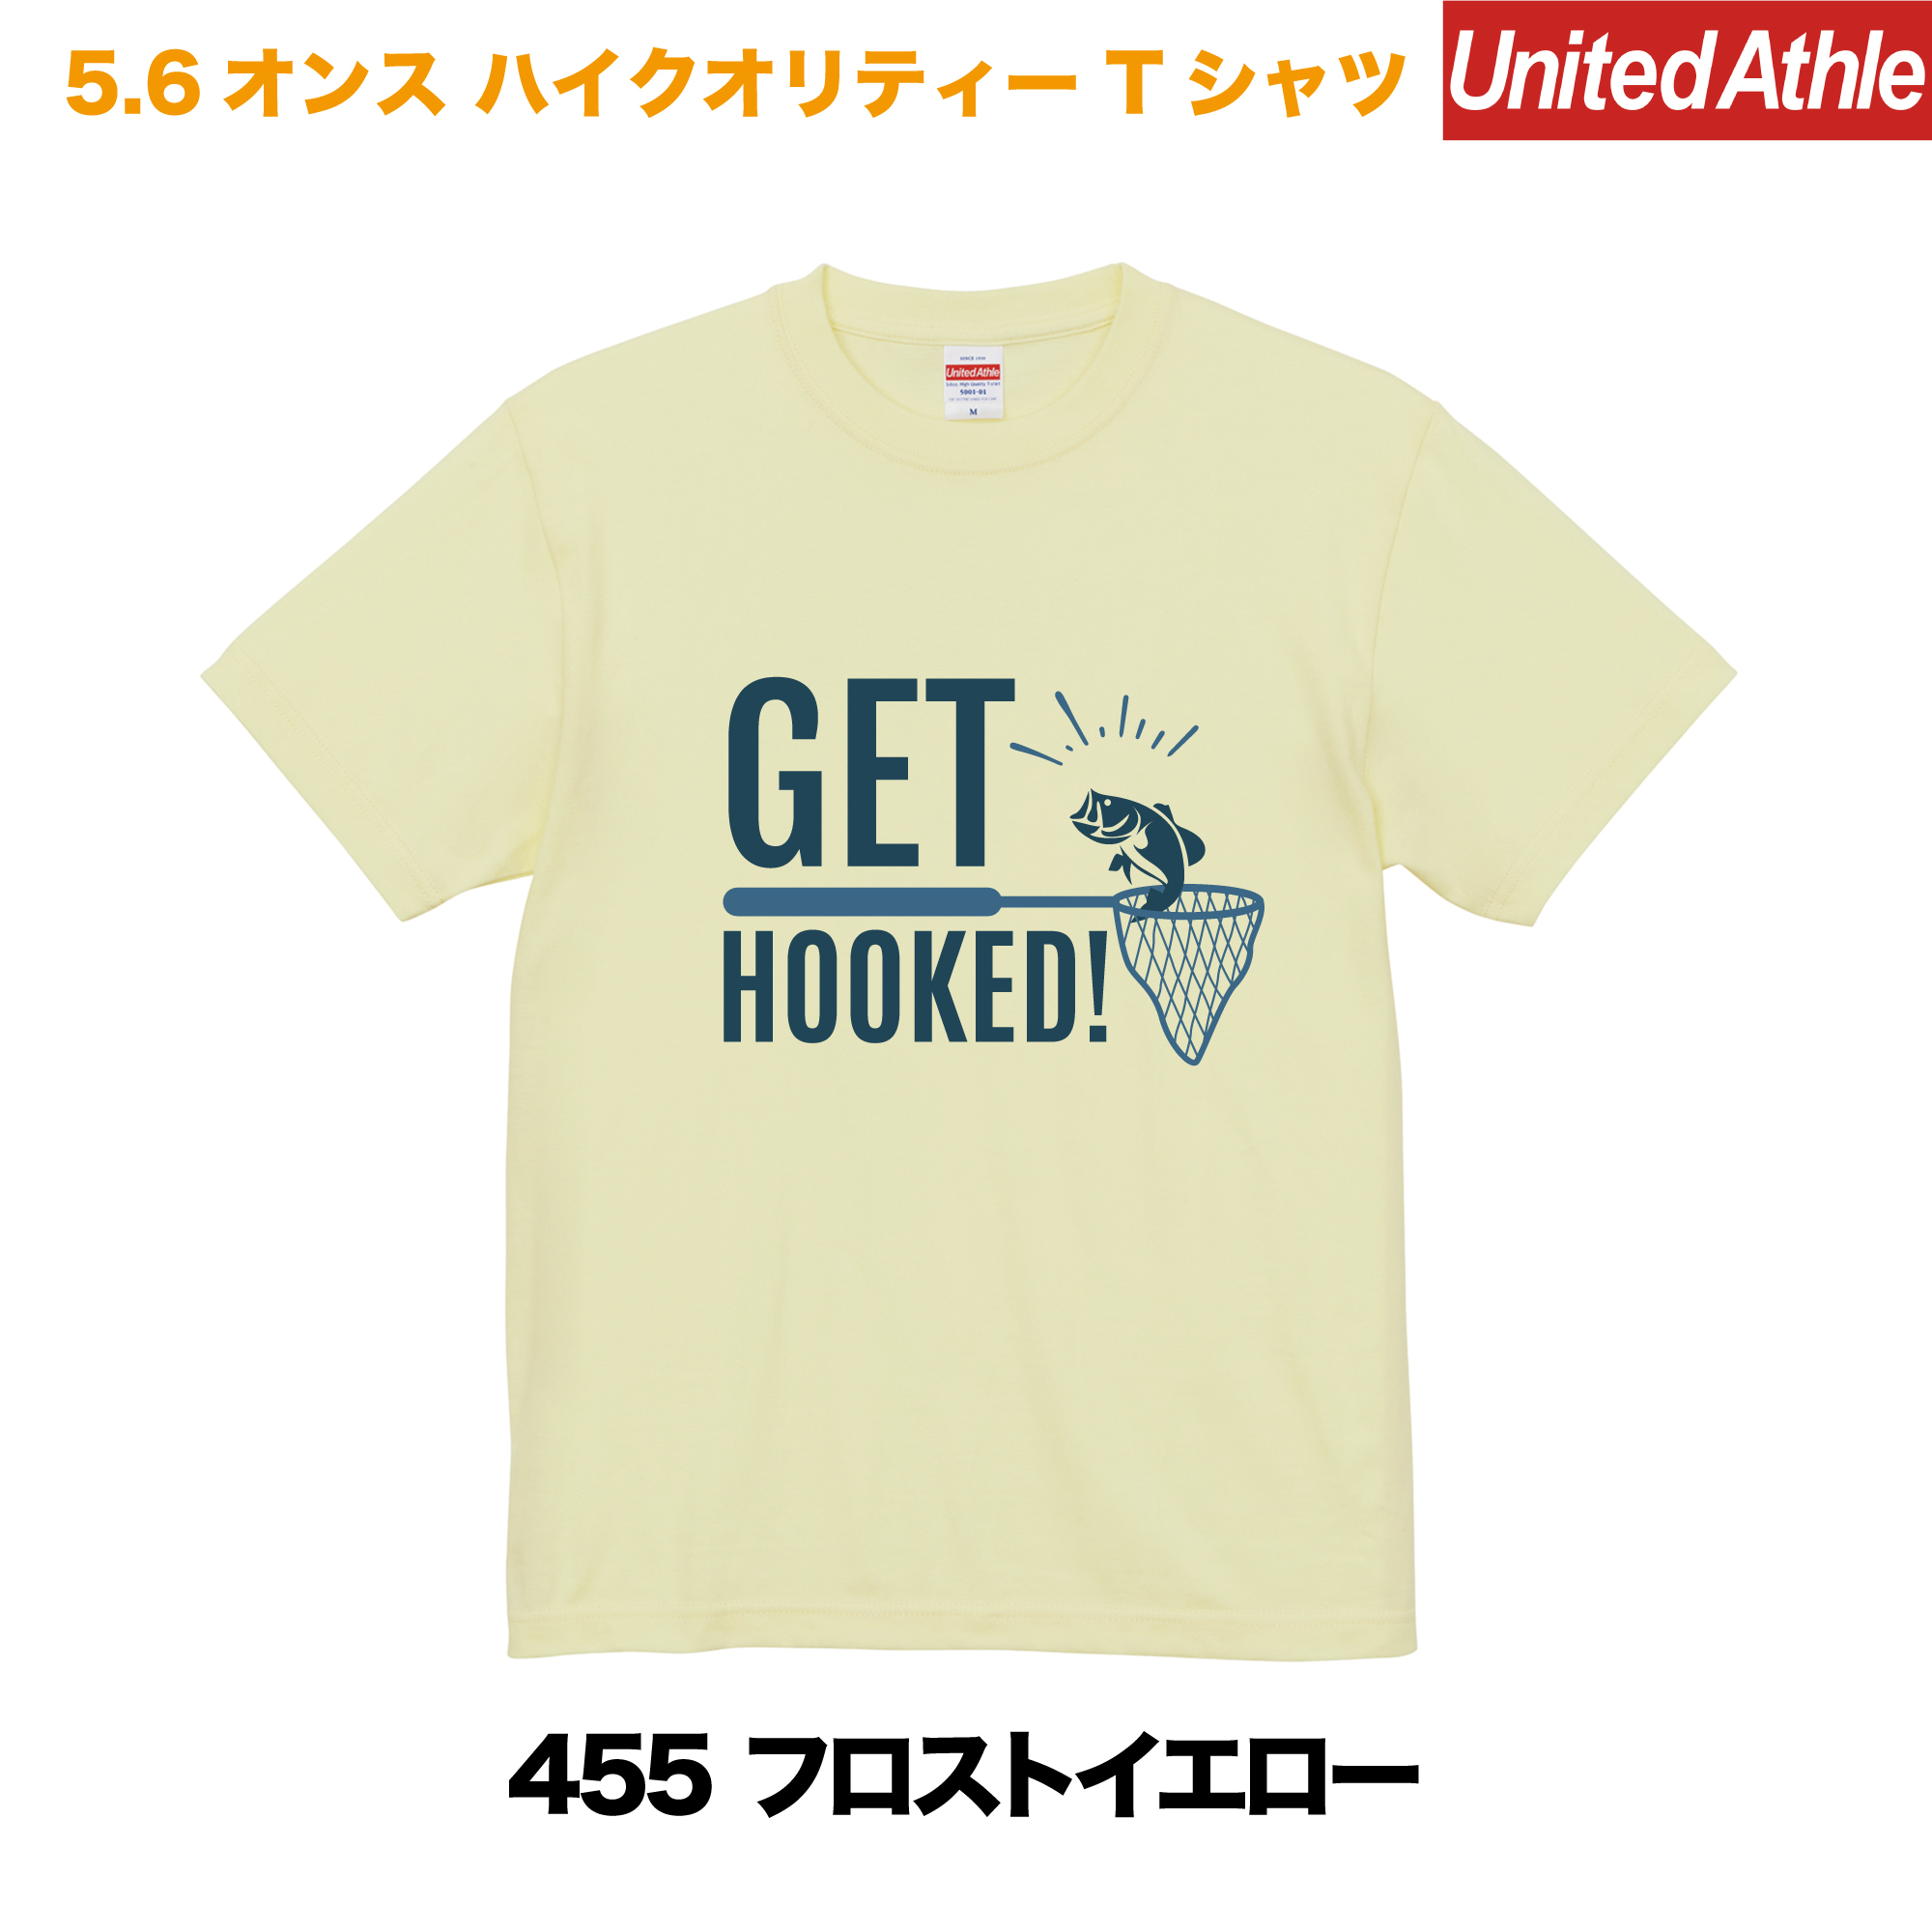 GET HOOKED　プリントTシャツ　5001-01【フロストイエロー】＜アダルト＞